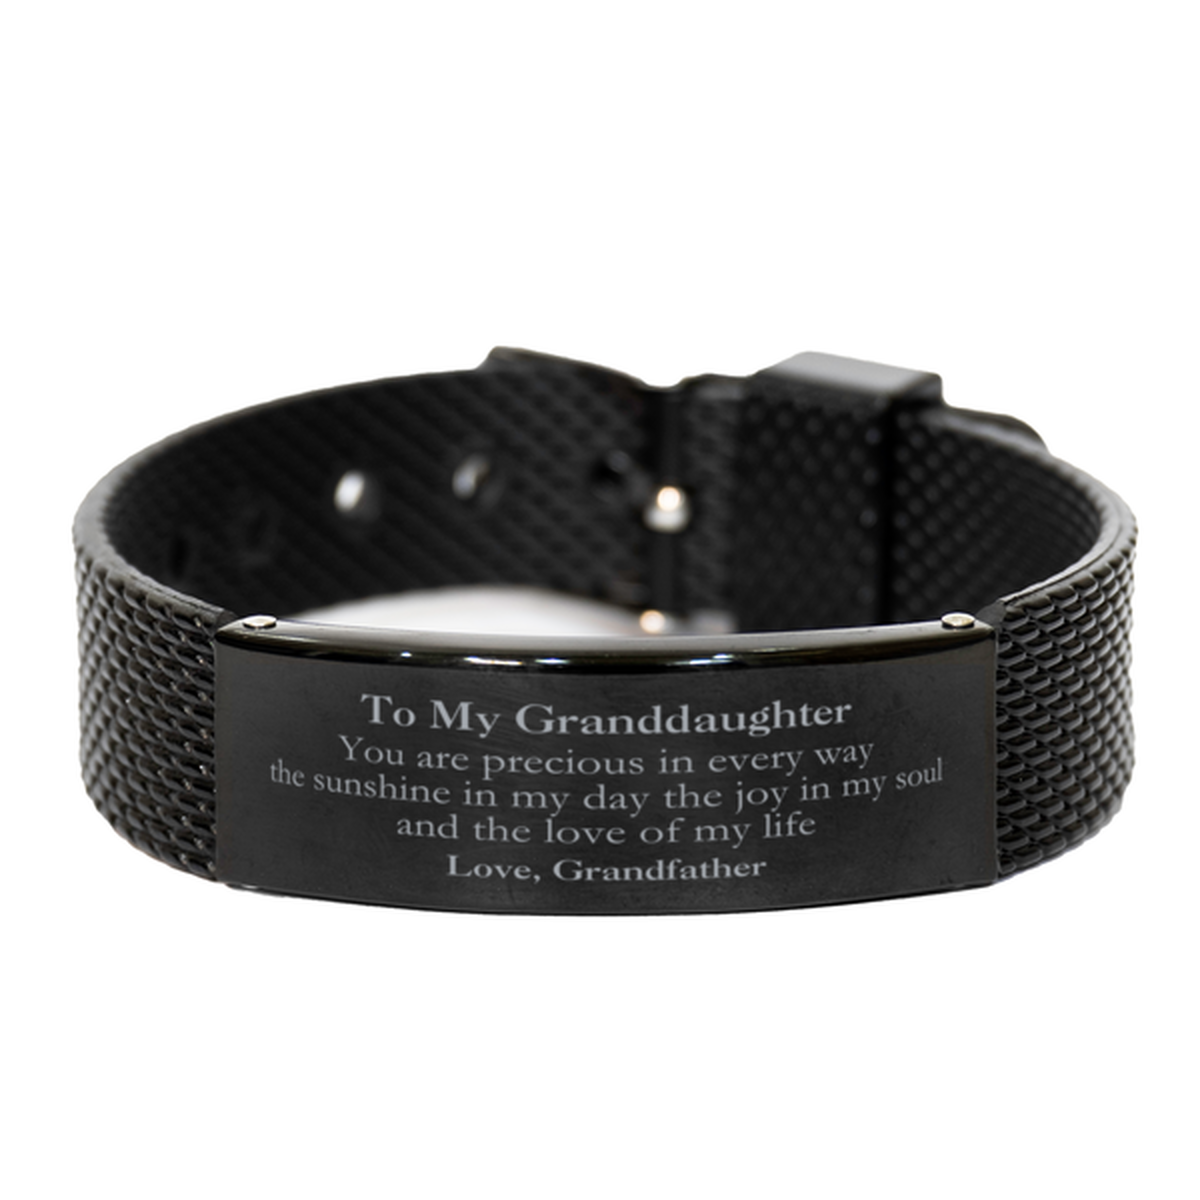 Graduation Gifts for Granddaughter Black Shark Mesh Bracelet Present from Grandfather, Christmas Granddaughter Birthday Gifts Granddaughter You are precious in every way the sunshine in my day. Love, Grandfather